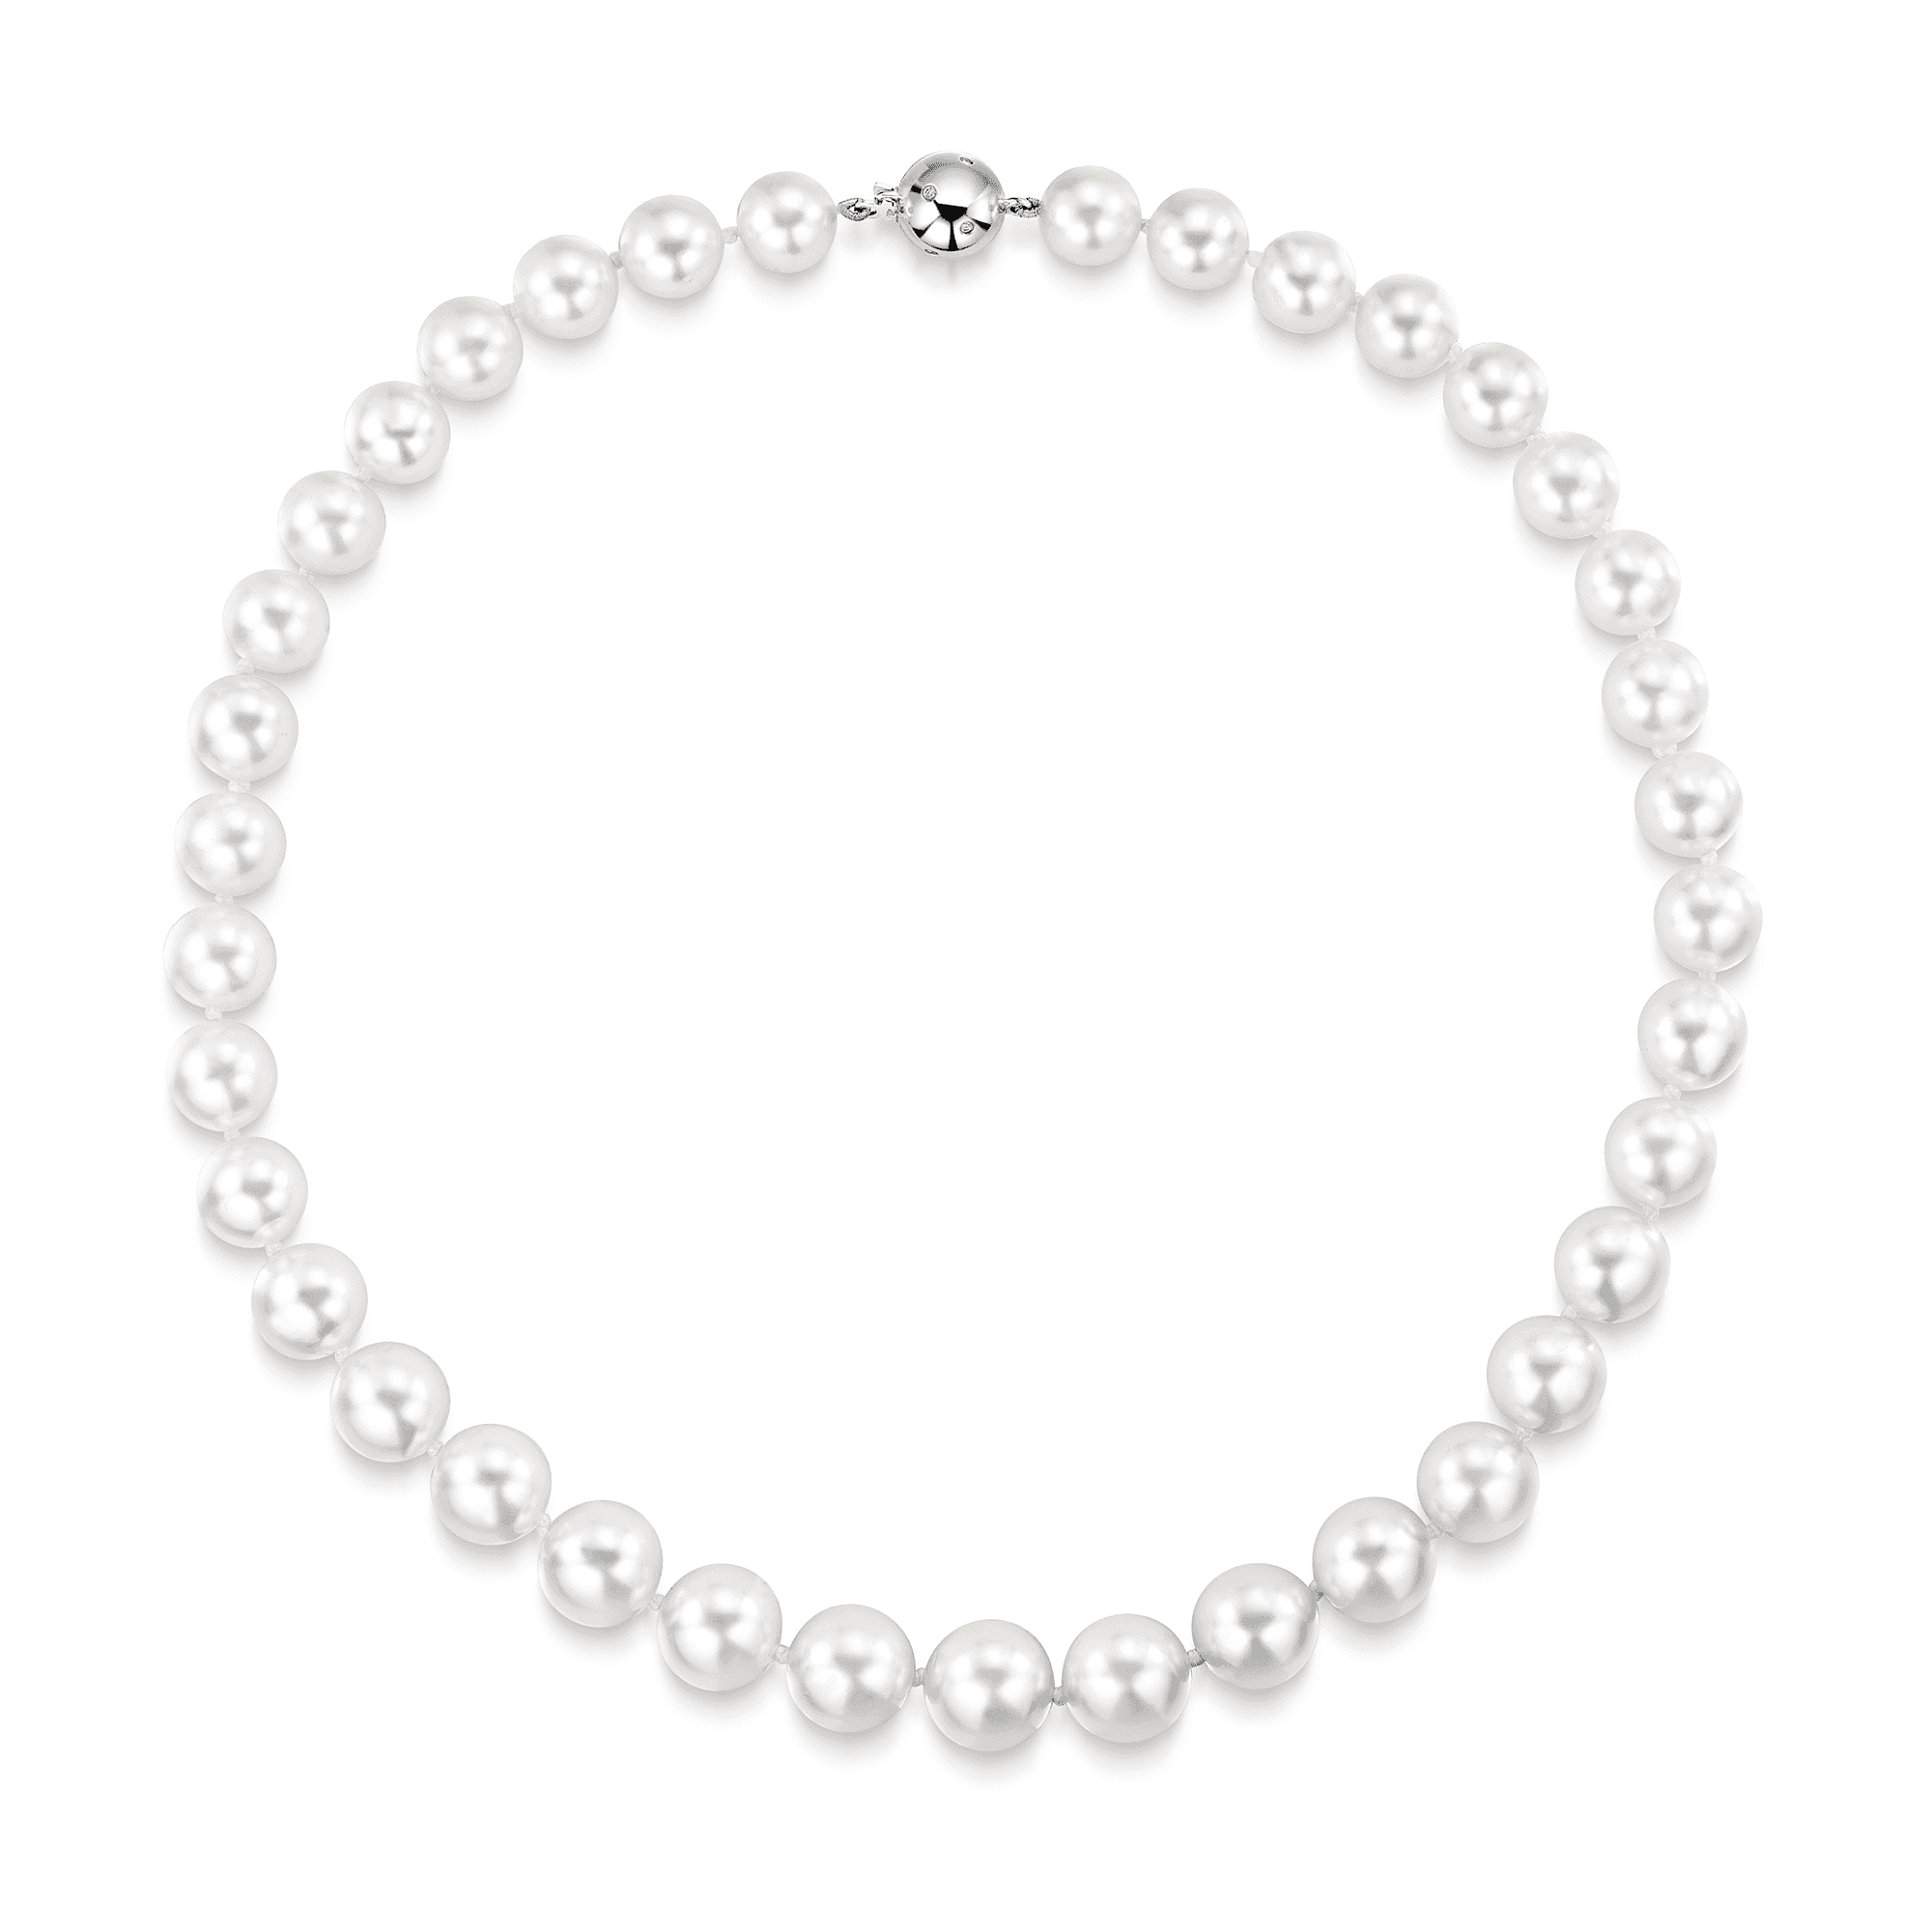 South Sea Cultured Graduated Pearl Necklet with White Gold Scattered Diamond Ball Clasp